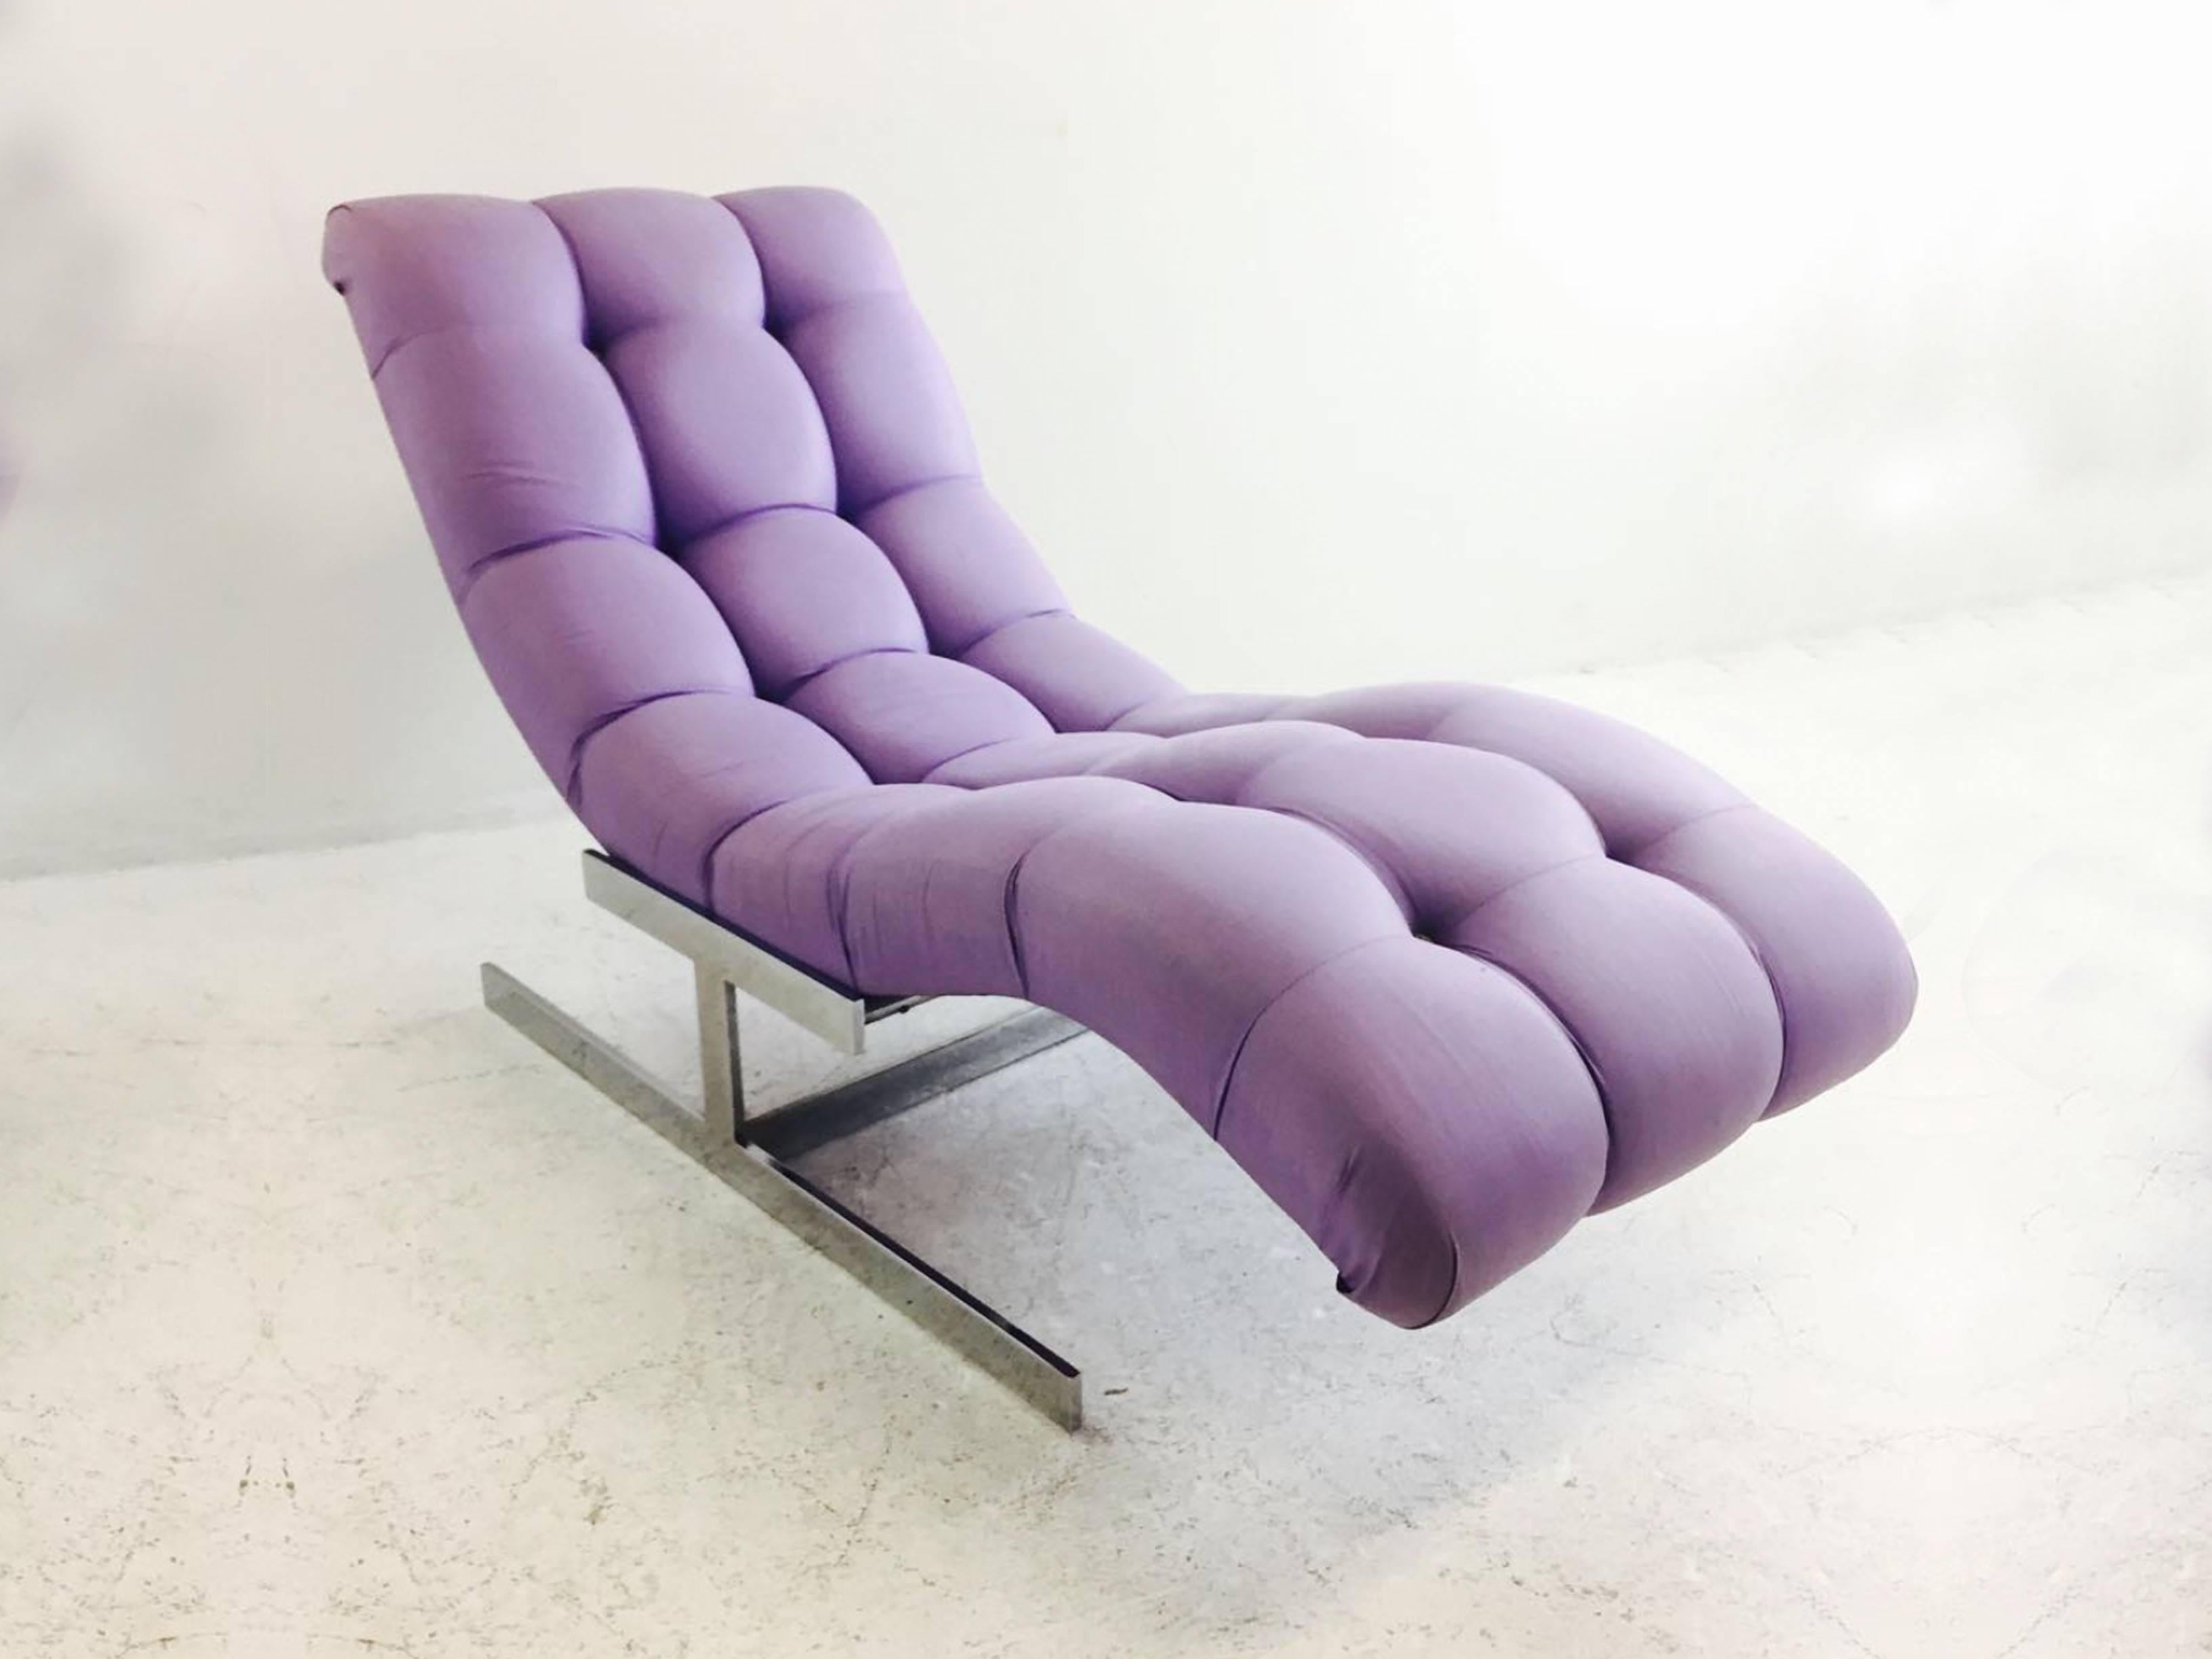 Chrome cantilever base chaise longue in the style Milo Baughman. Lavender upholstery in a biscuit tuft pattern, in good vintage condition, circa 1970s.

Dimensions: 27" W x 58" D x 33" T
Seat height 16".
 